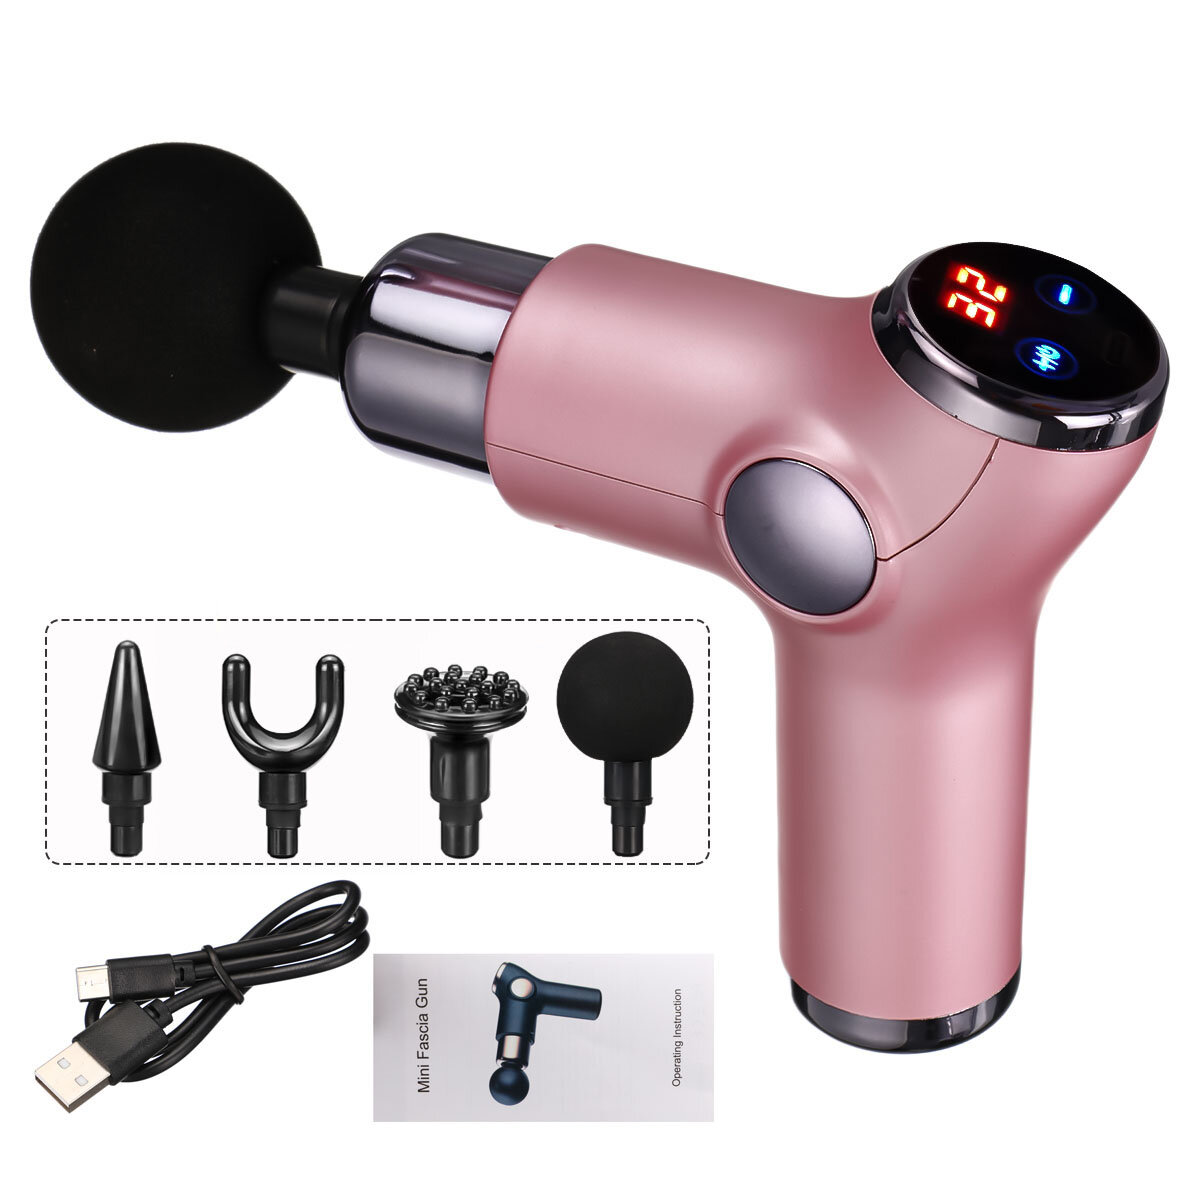 USB Electric Percussion Massage Guns HandHeld Deep Muscles Relaxing Shock Vibration Therapy Device P